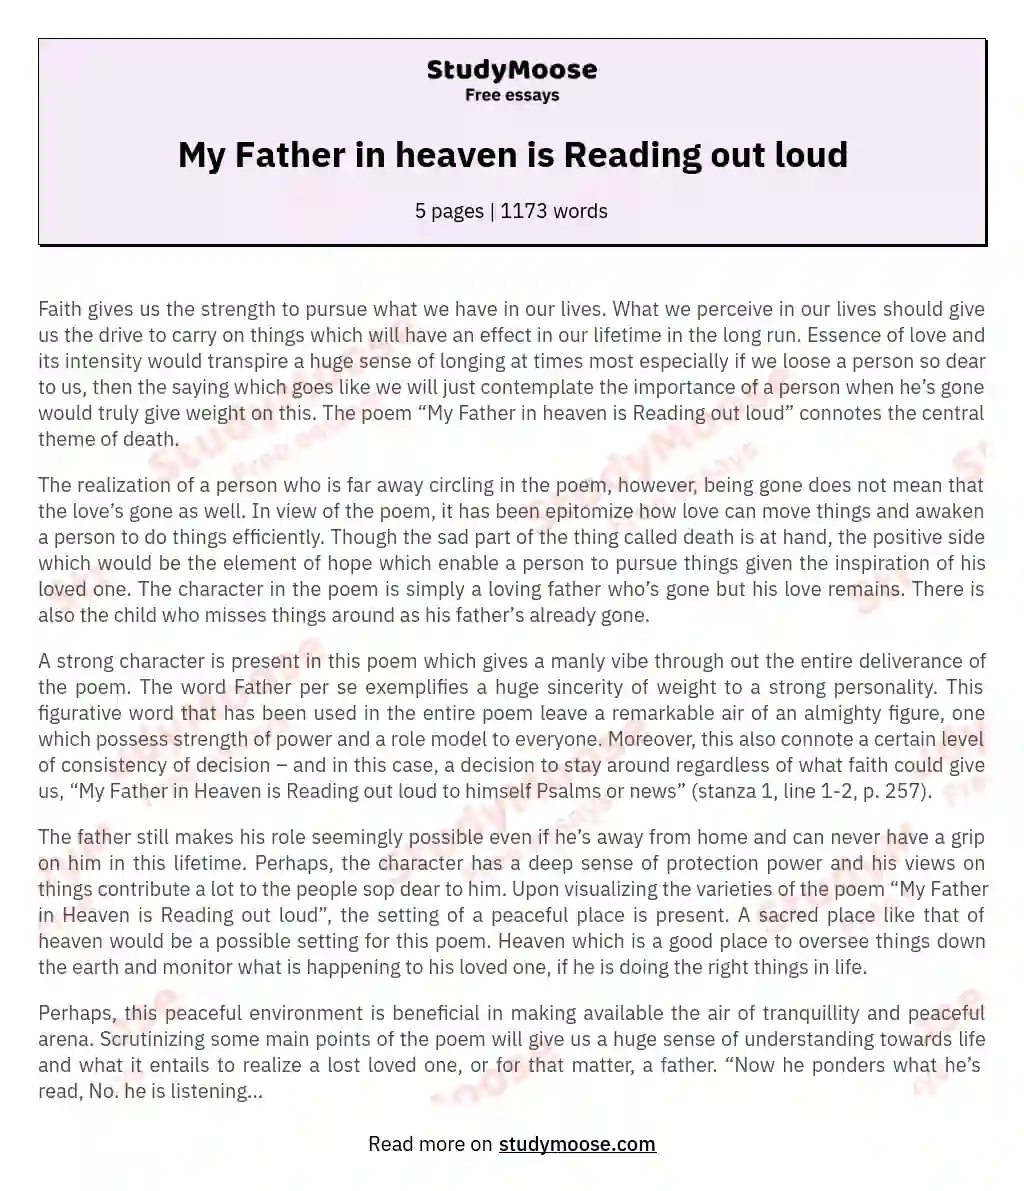 My Father in heaven is Reading out loud essay